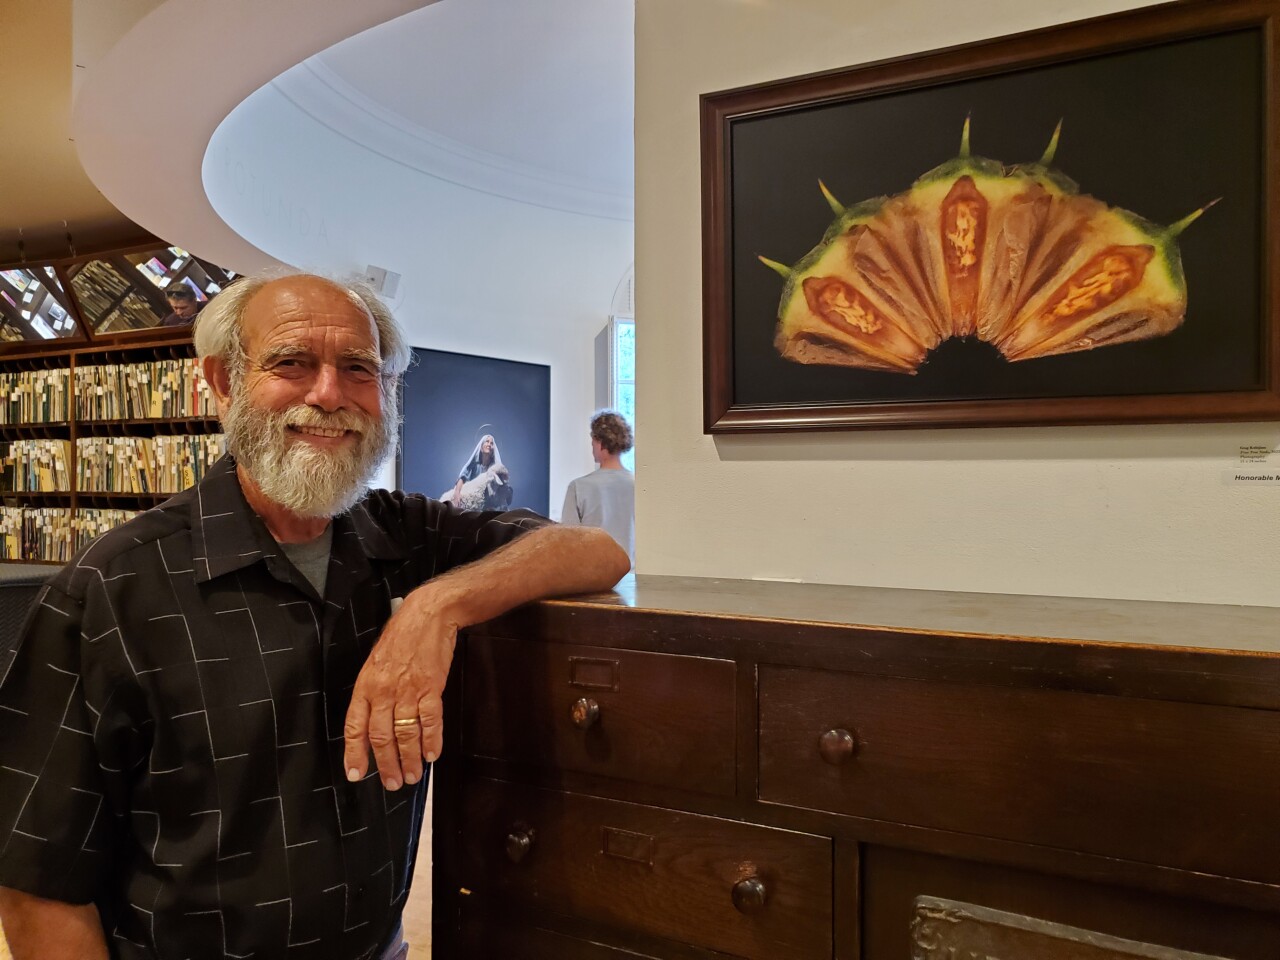 Artist Greg Kalajian displays his work in the Athenaeum Music & Arts Library's Juried Exhibition.